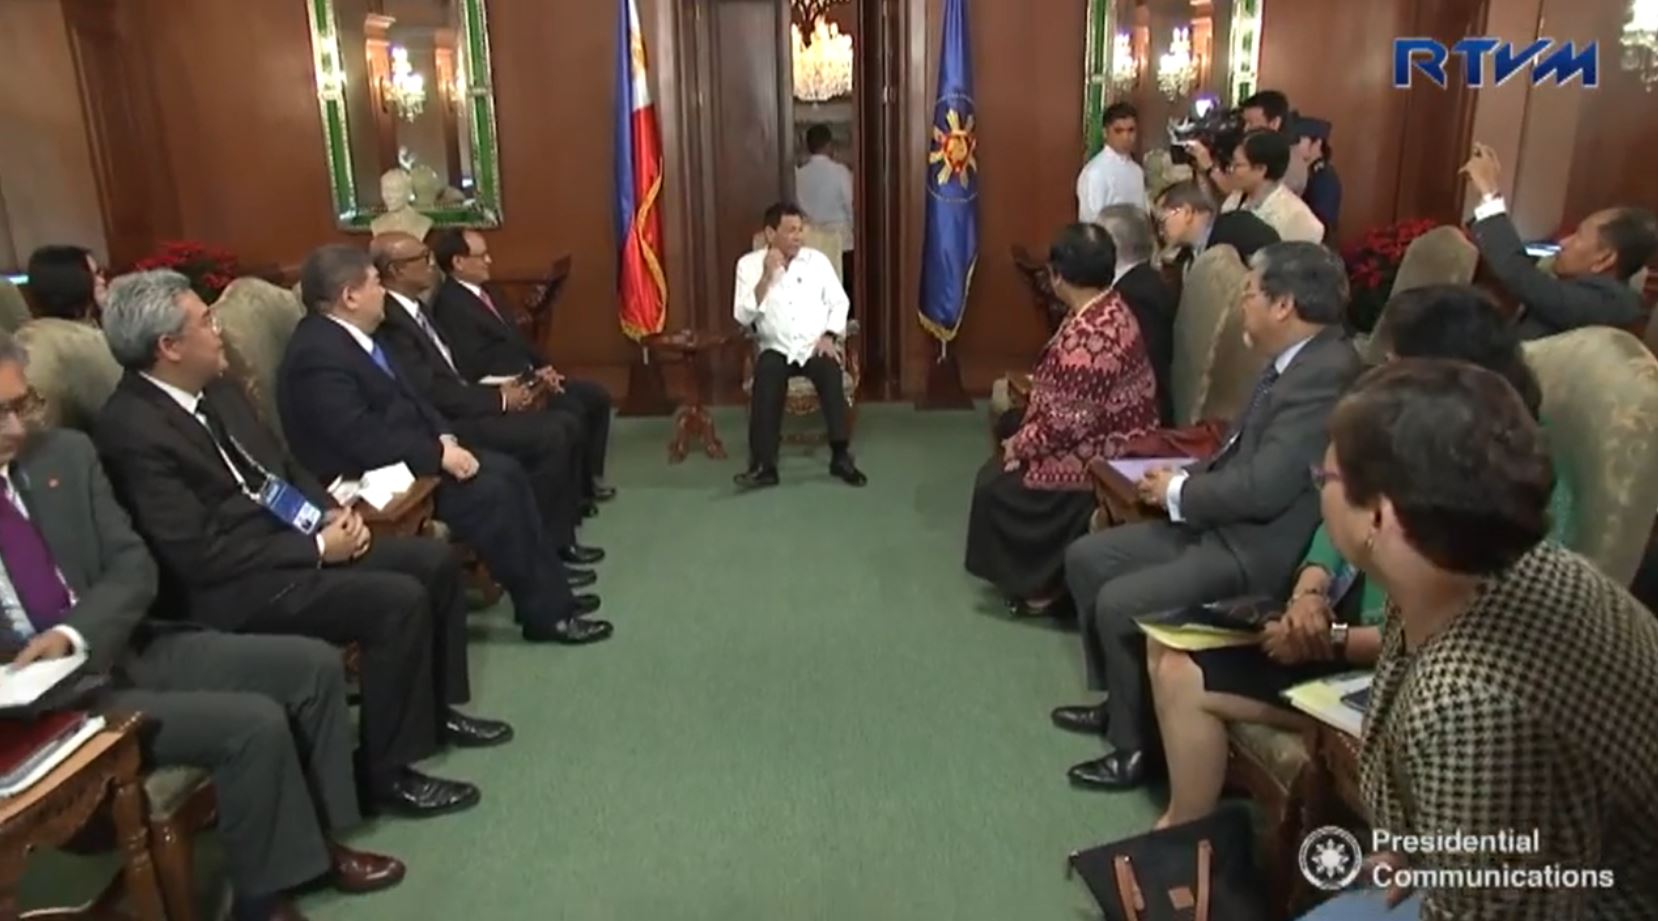 Courtesy call of ASEAN officials to President Duterte in Malacanang(Photo grabbed from RTVM video)